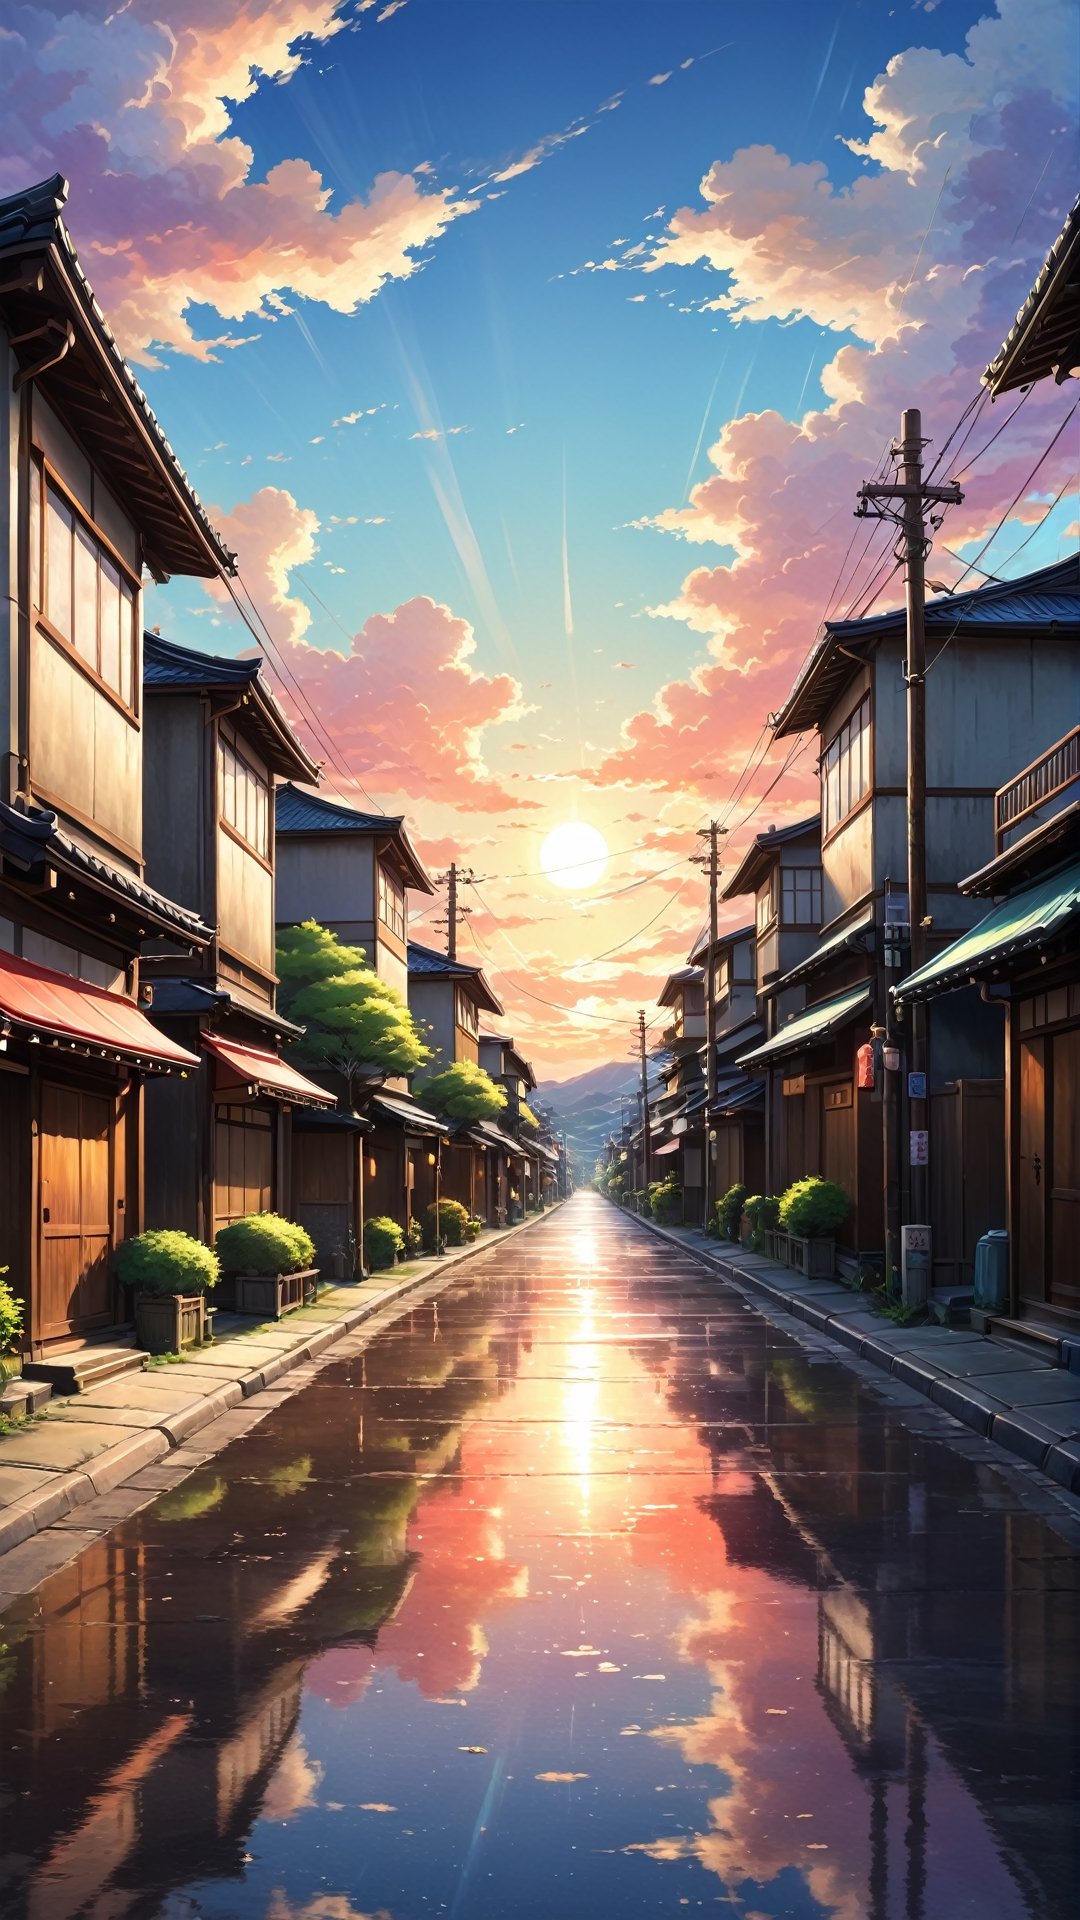 2d anime style, oil painting, rough paint, an empty japanese street, breathtaking, visually rich, panoramic, manga style, empty horizon, reflections, white summer clouds, colorful sky with sunset colors, animation background, glow, highly detailed, lens flare, light bloom, hand-drawn, beautiful gradient, glowing shadows, fine detail, film grain, vignette, light leak, 